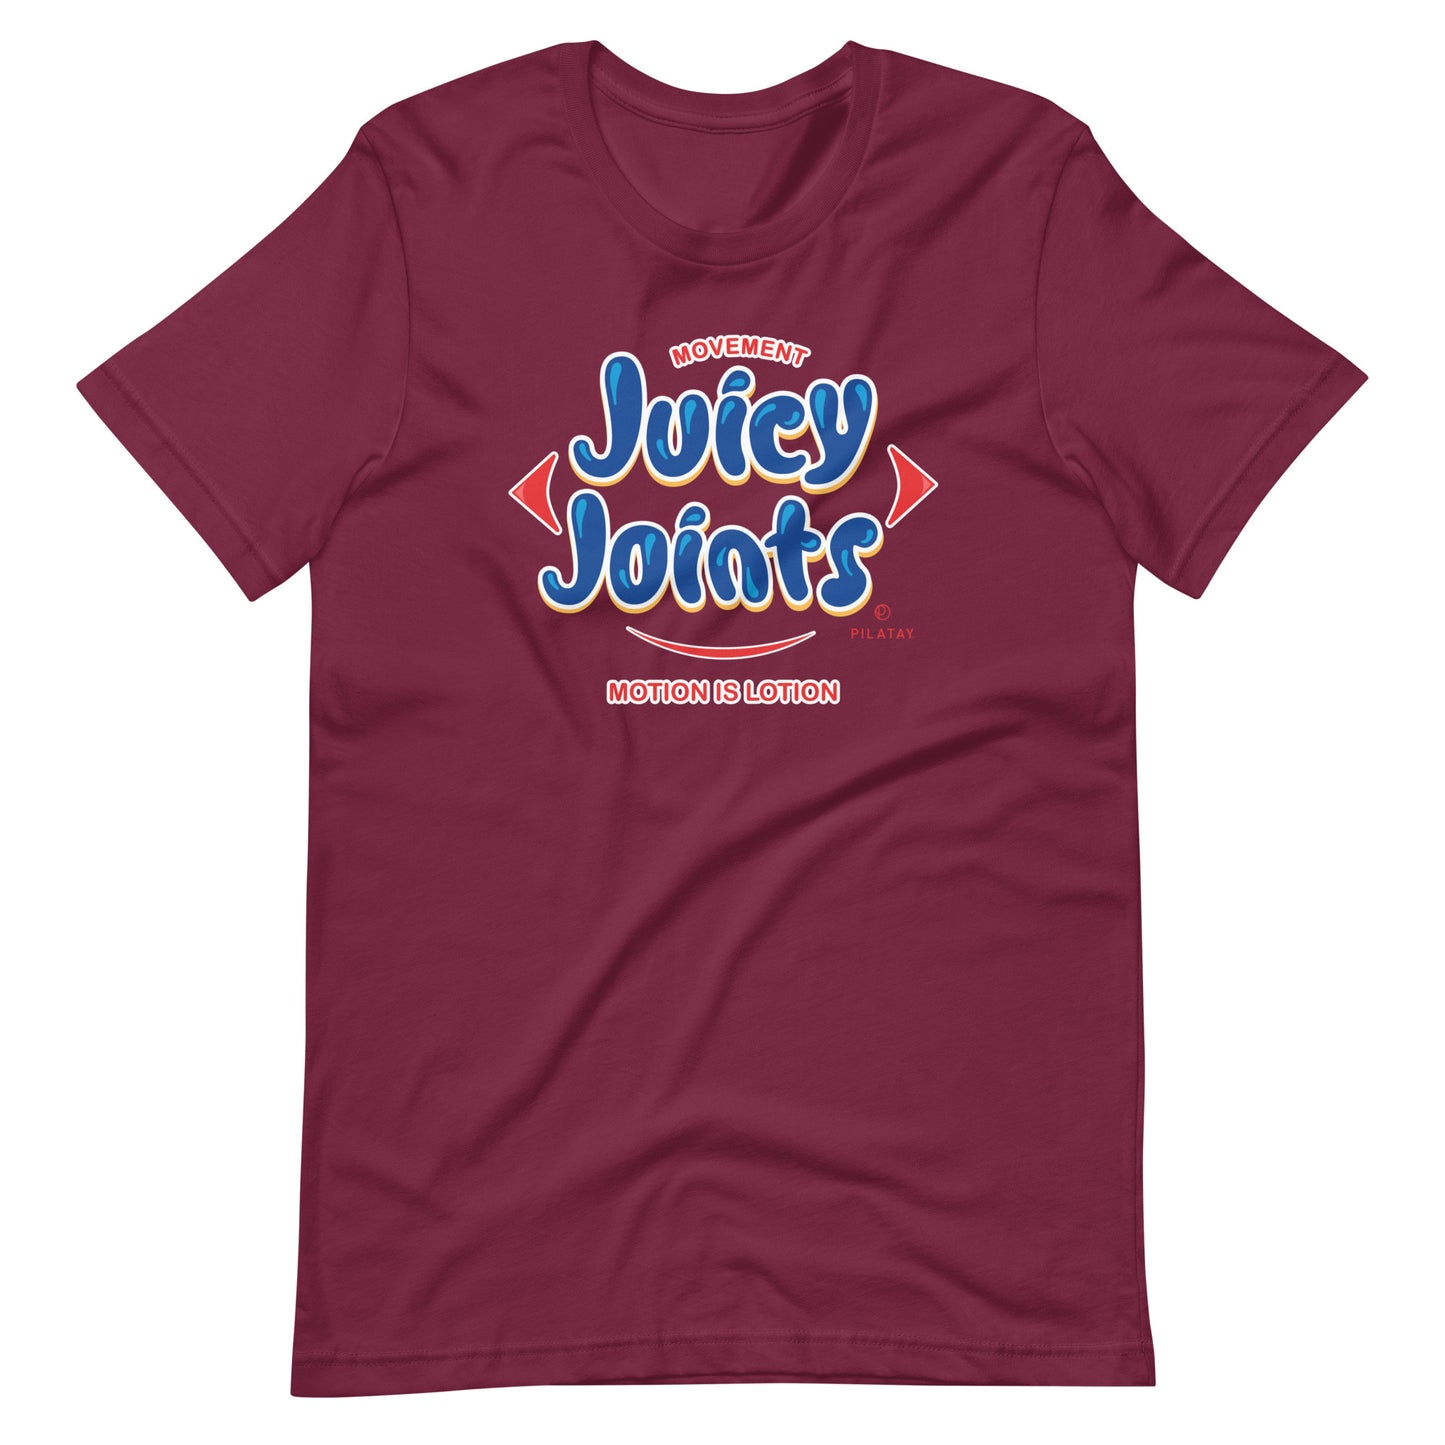 Juicy Joints - Motion is Lotion - Unisex Tee